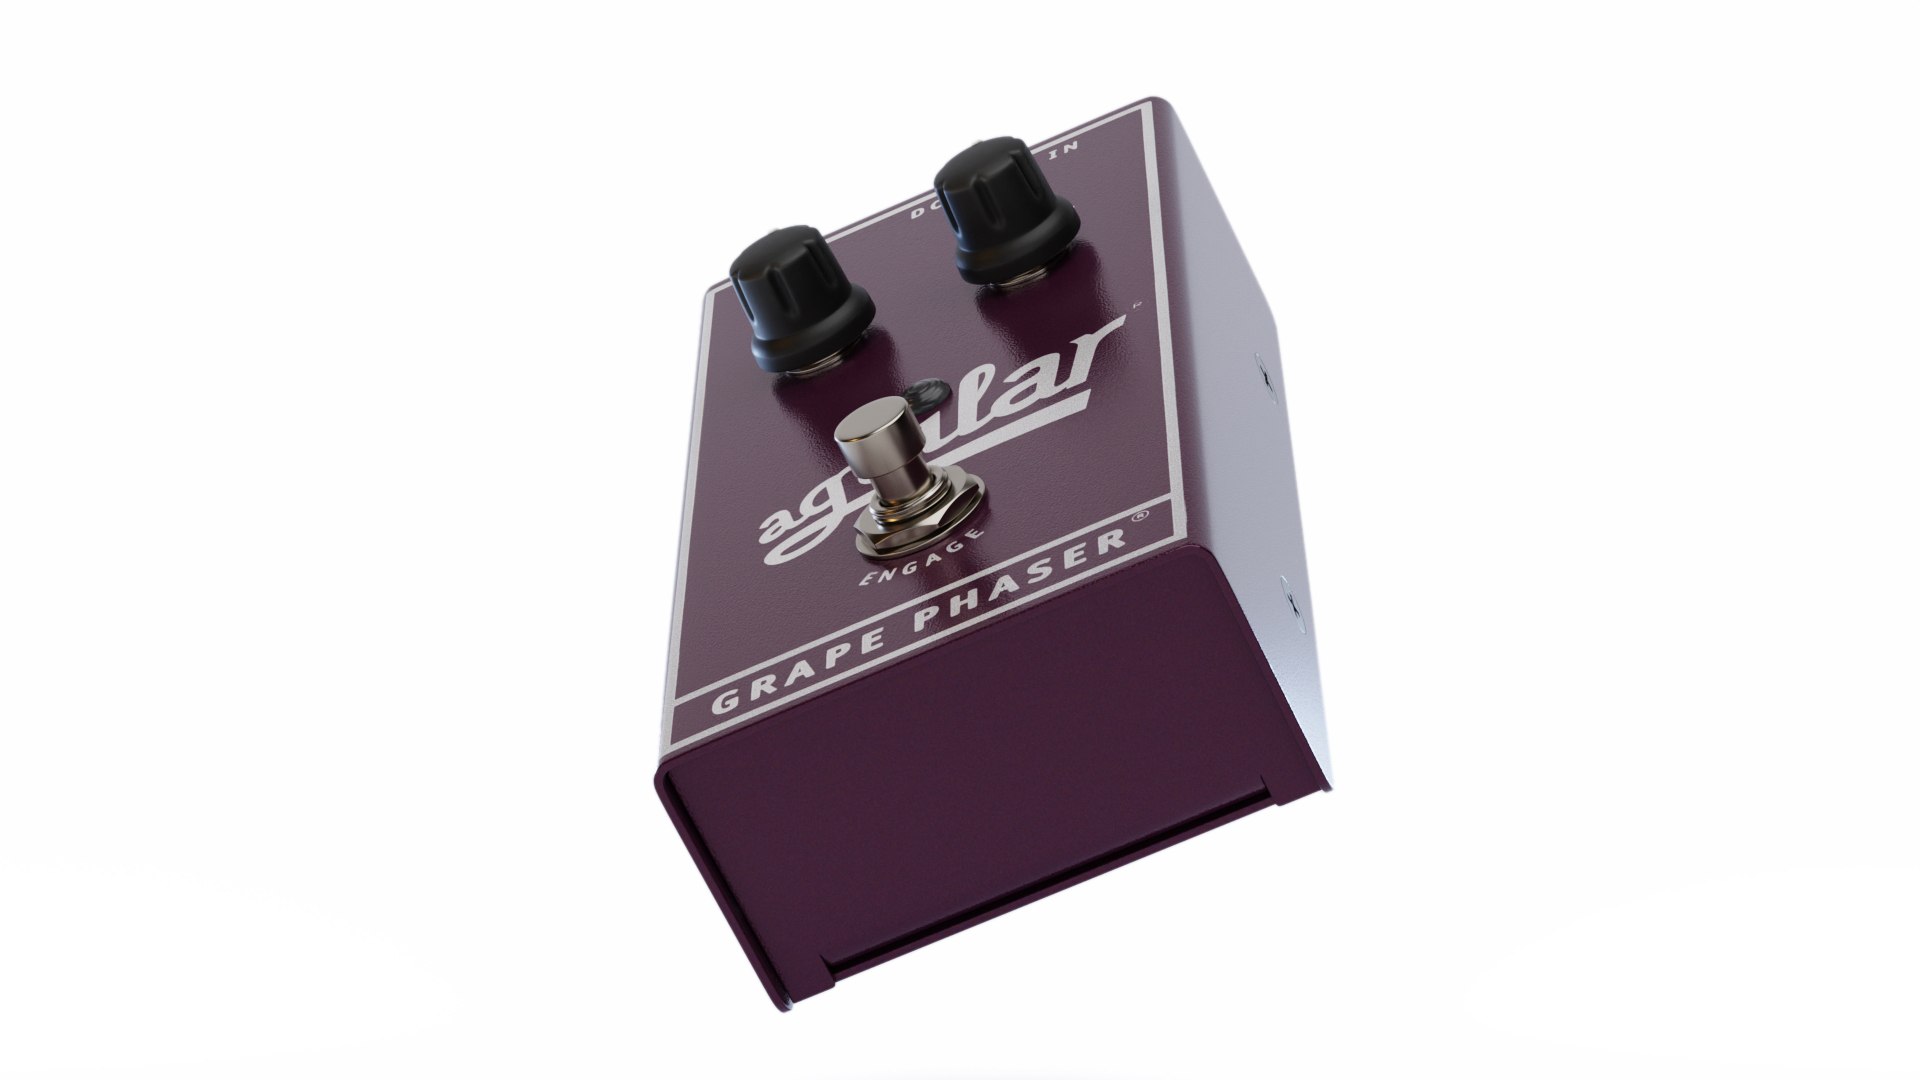 Aguilar Grape Phaser Bass Phase Pedal 3D Model - TurboSquid 1732790